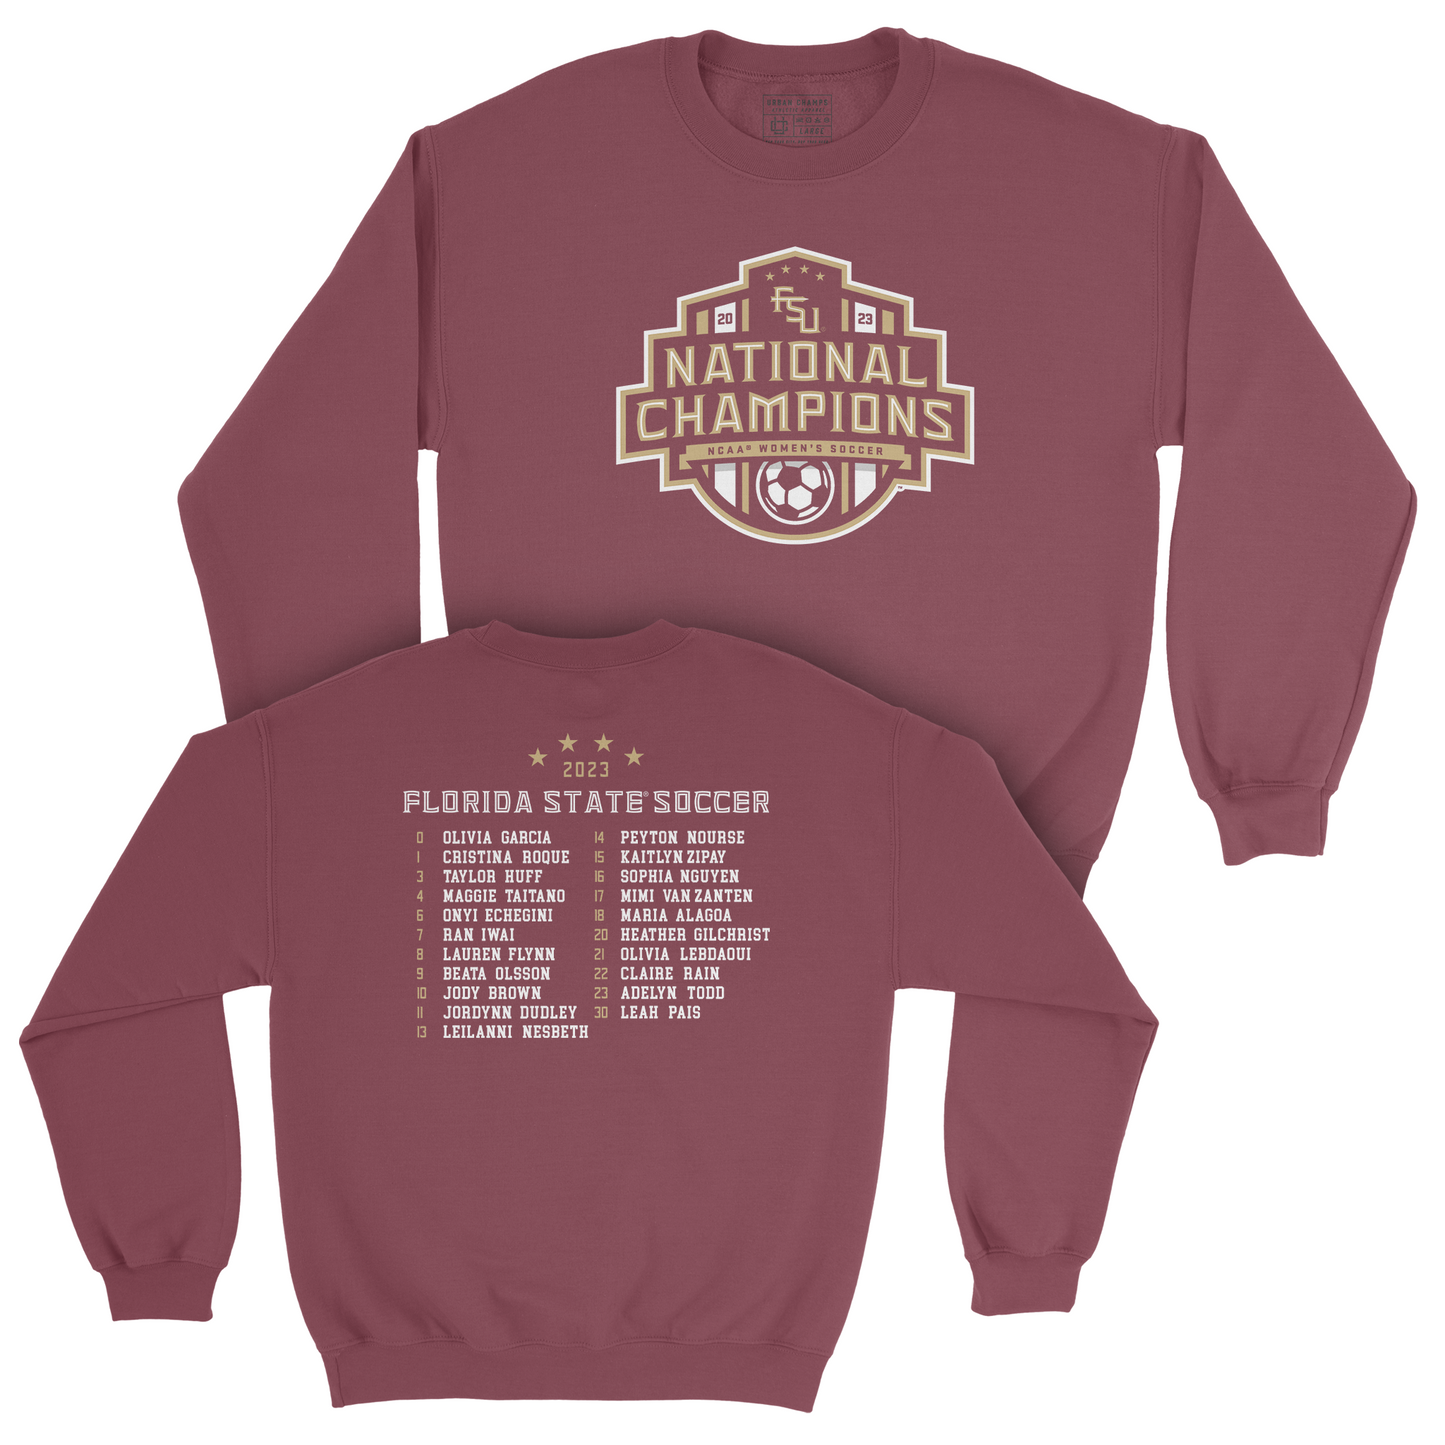 LIMITED RELEASE: 2023 Florida State Women's College Cup National Champions Crewneck by Retro Brand